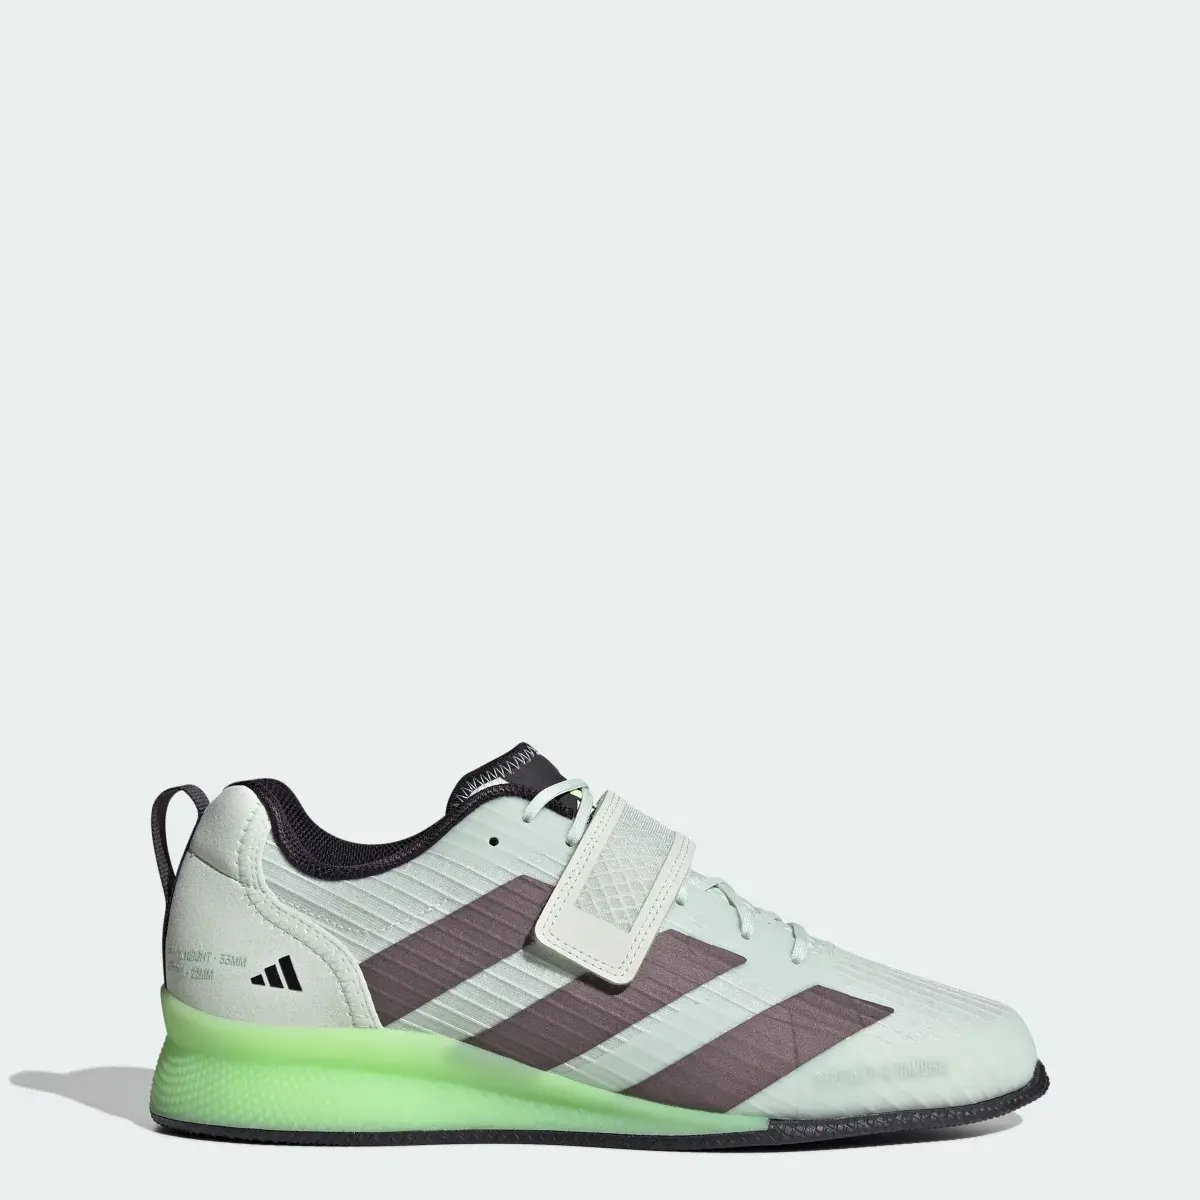 Adidas Adipower Weightlifting 3 Shoes. 1